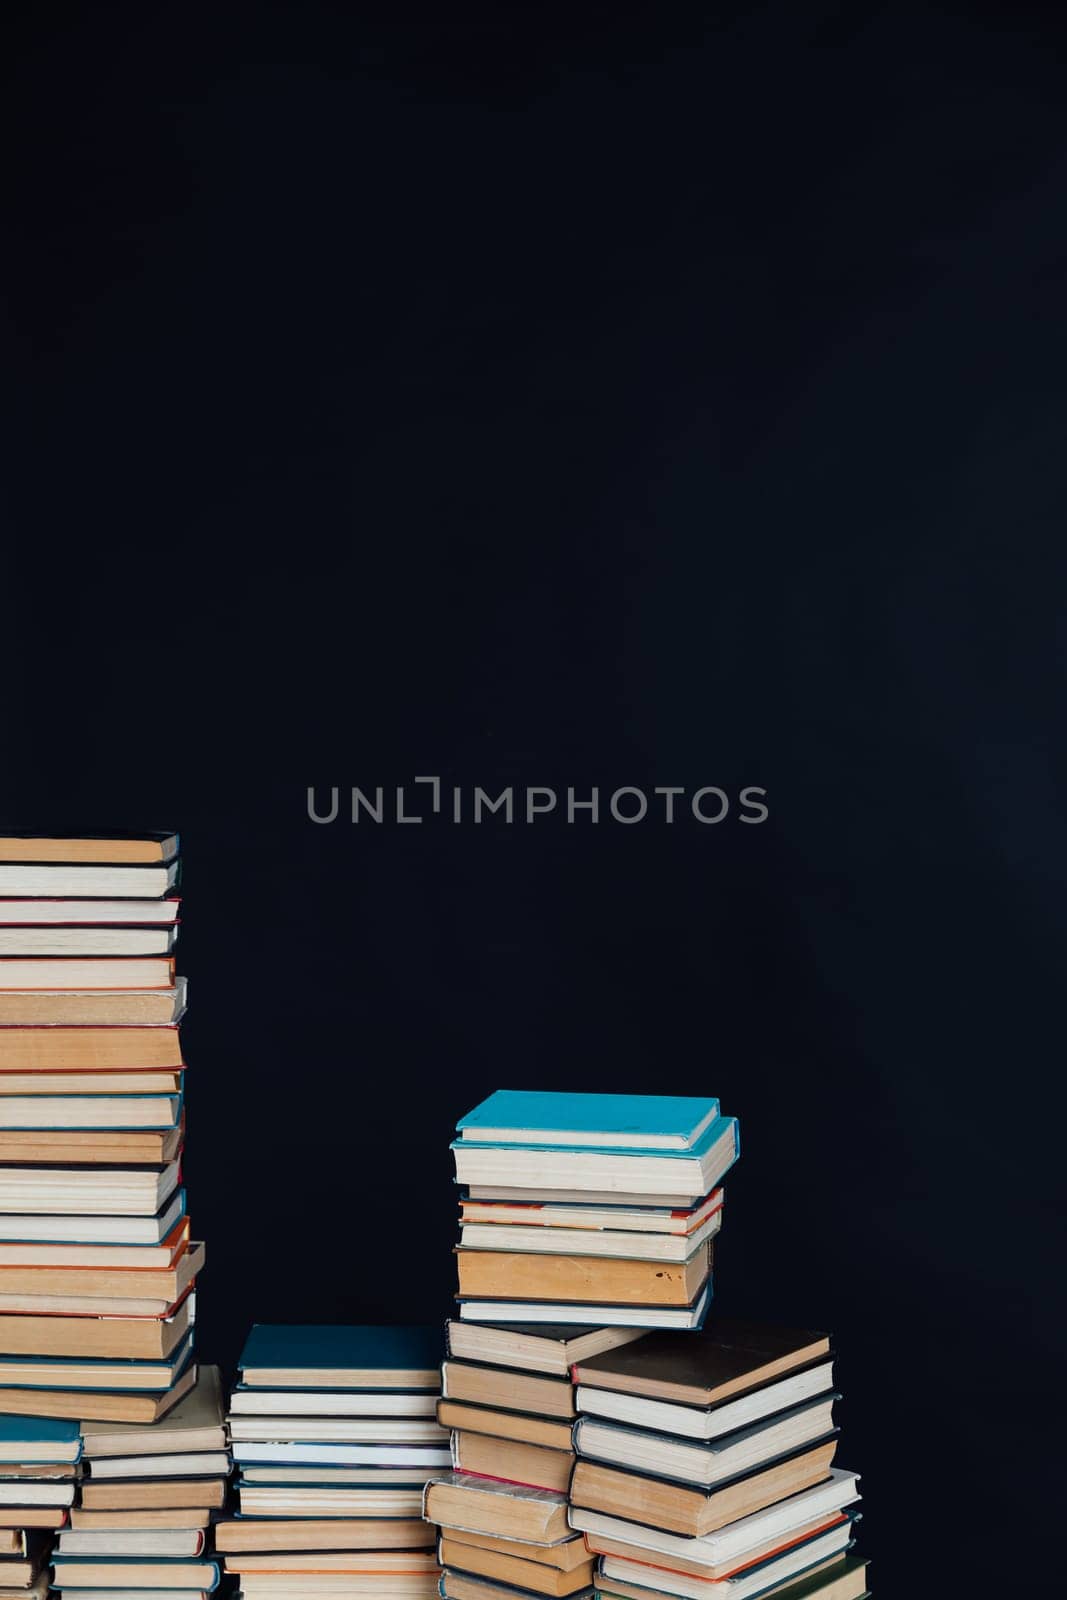 Stacks of educational books in school library on black background by Simakov